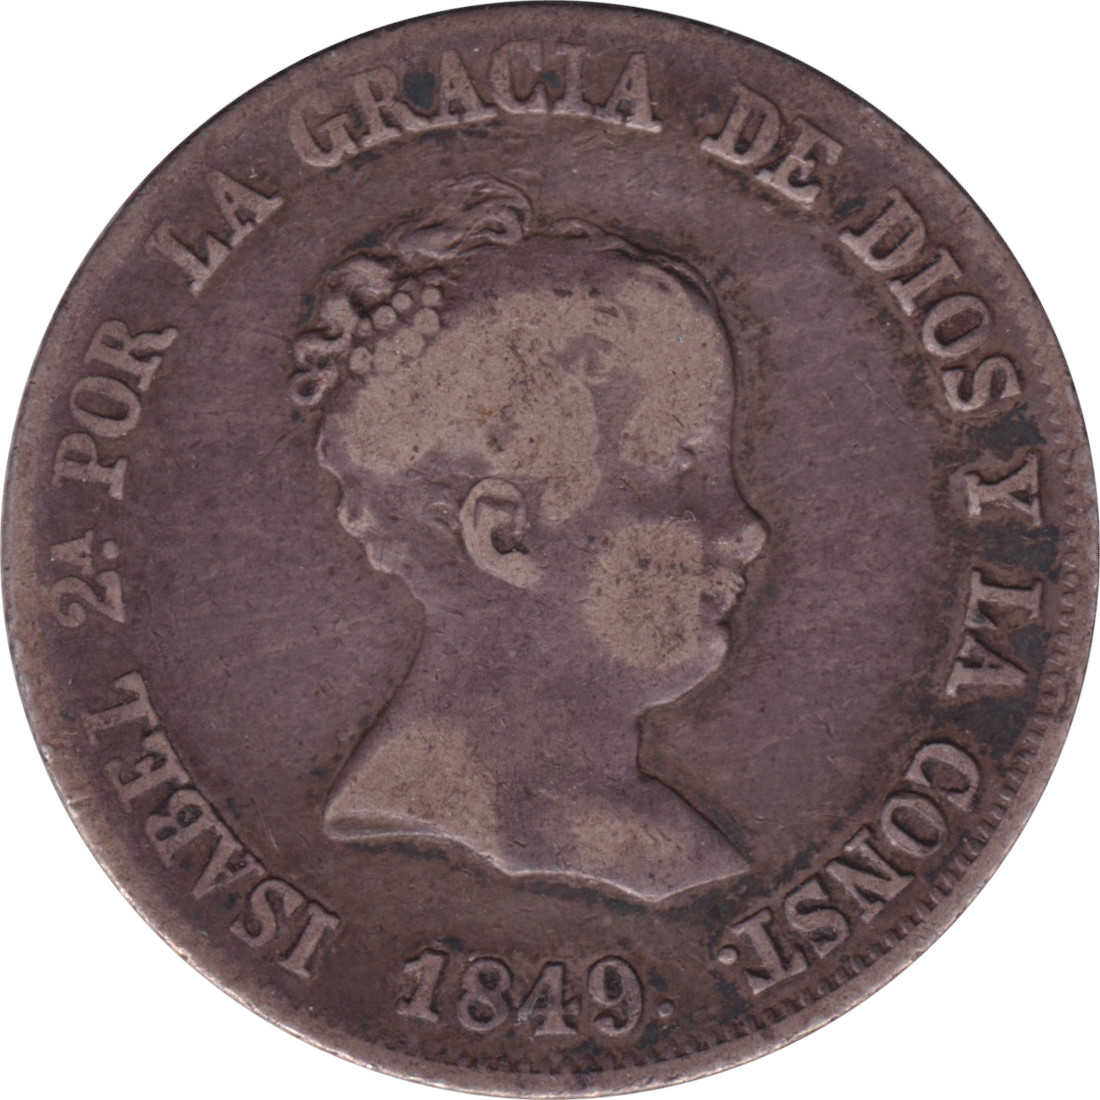 4 reales - Isabelle II - Type 3